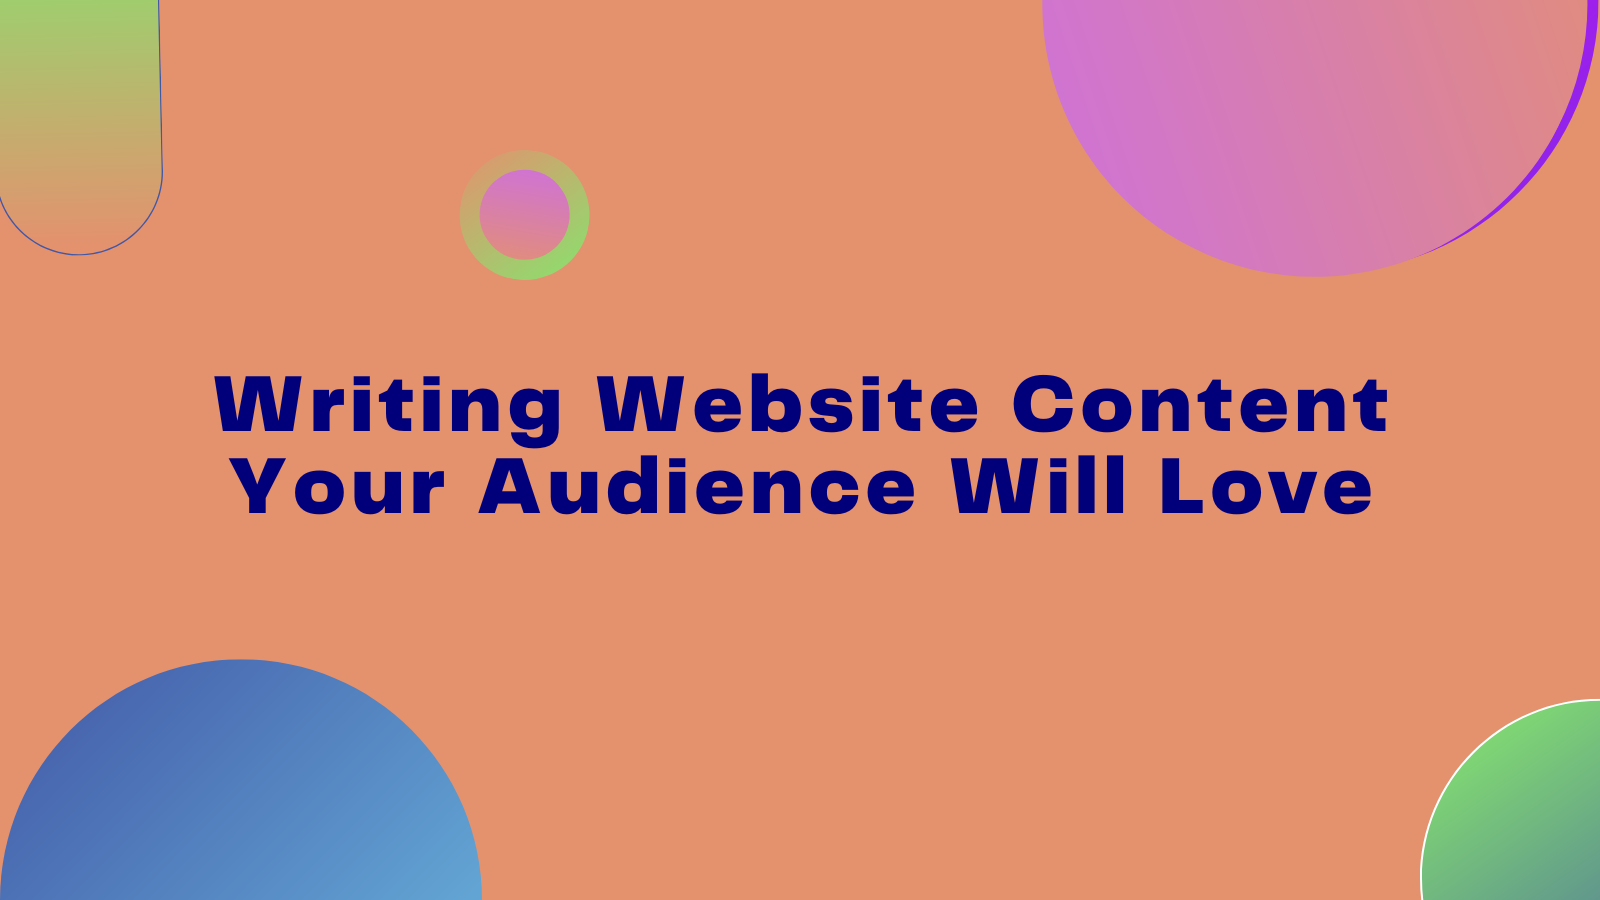 Writing Website Content Your Audience Will Love